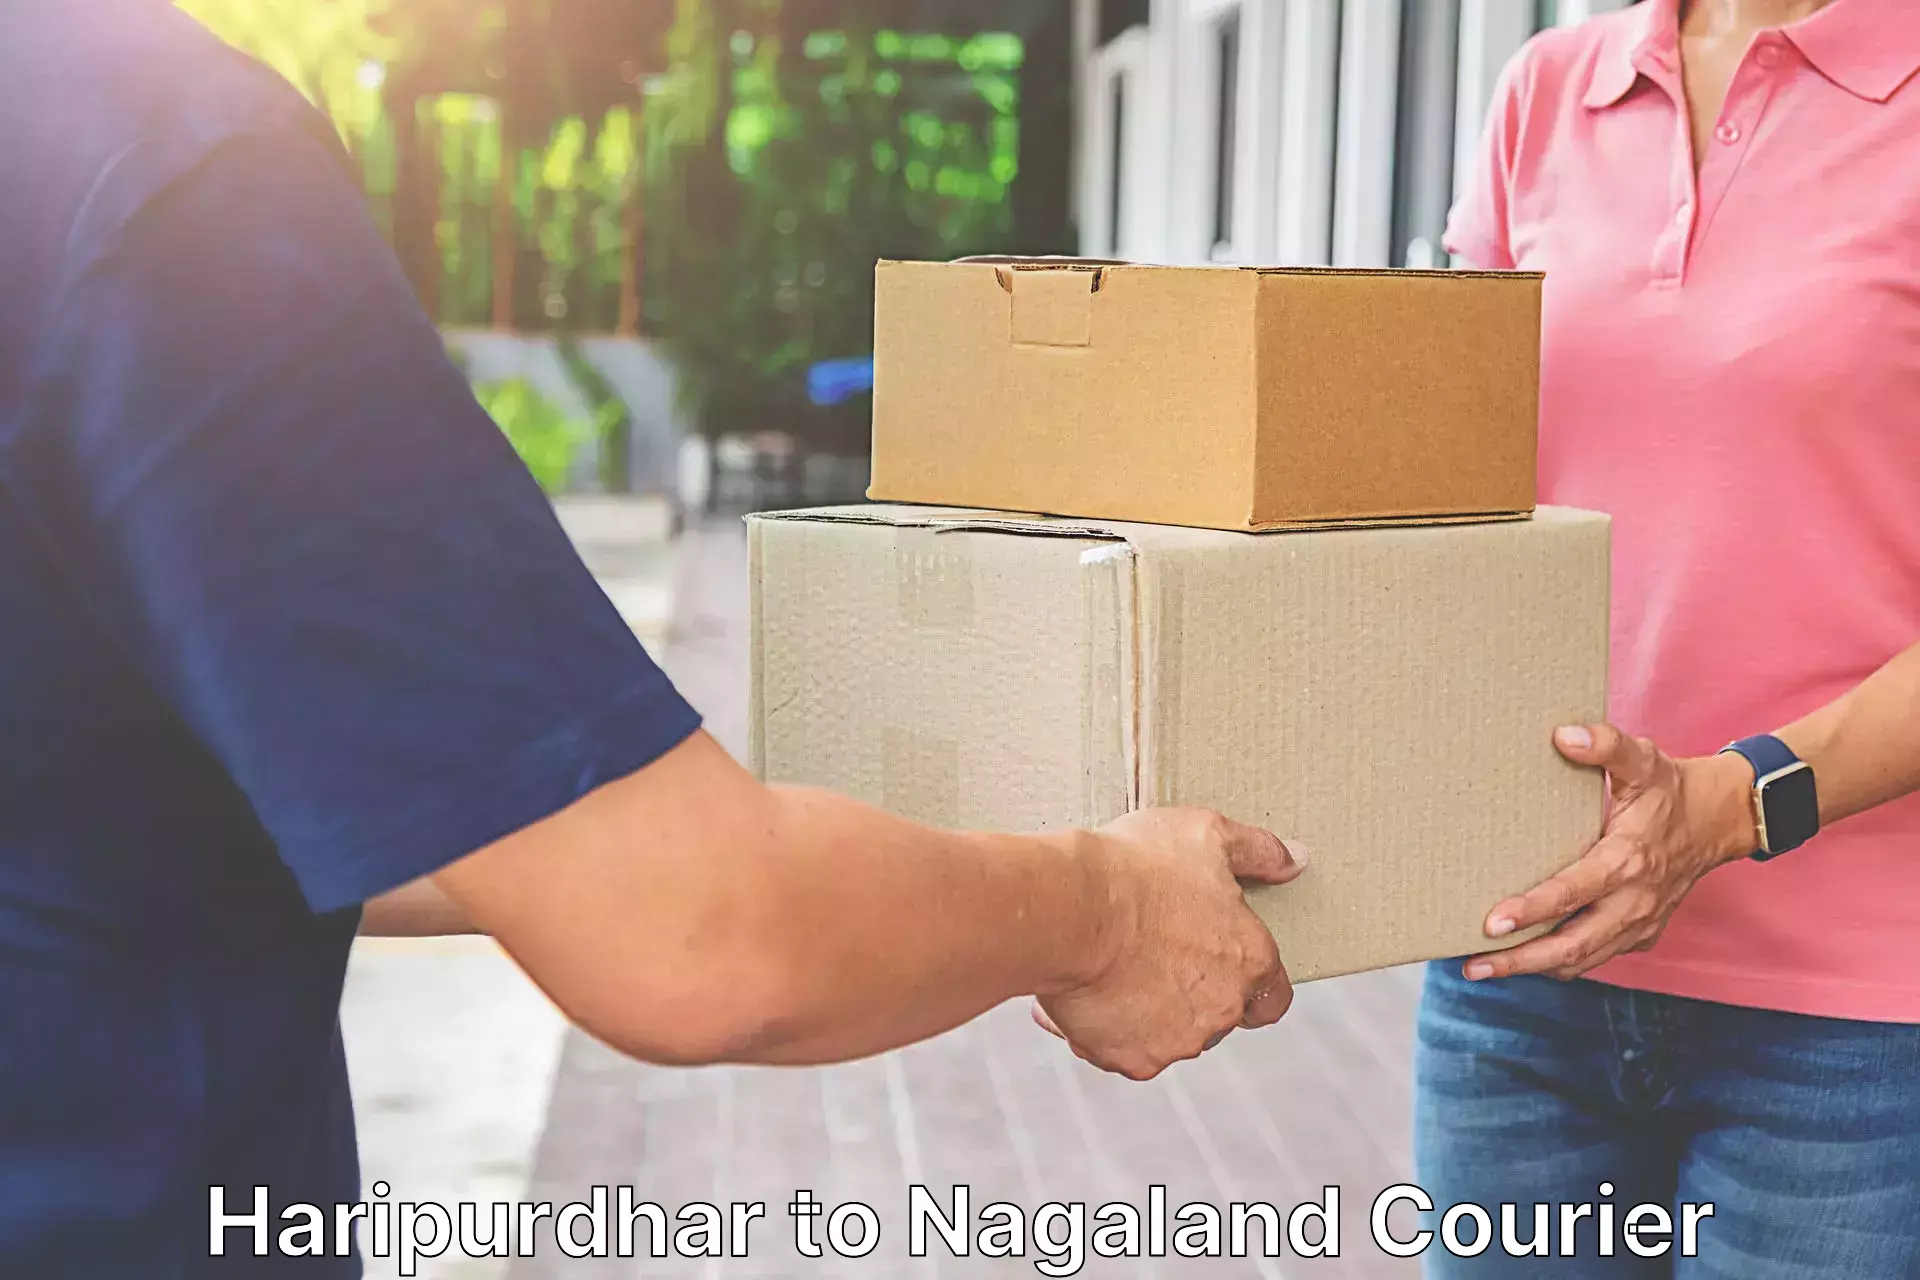 Next-day delivery options Haripurdhar to Mon